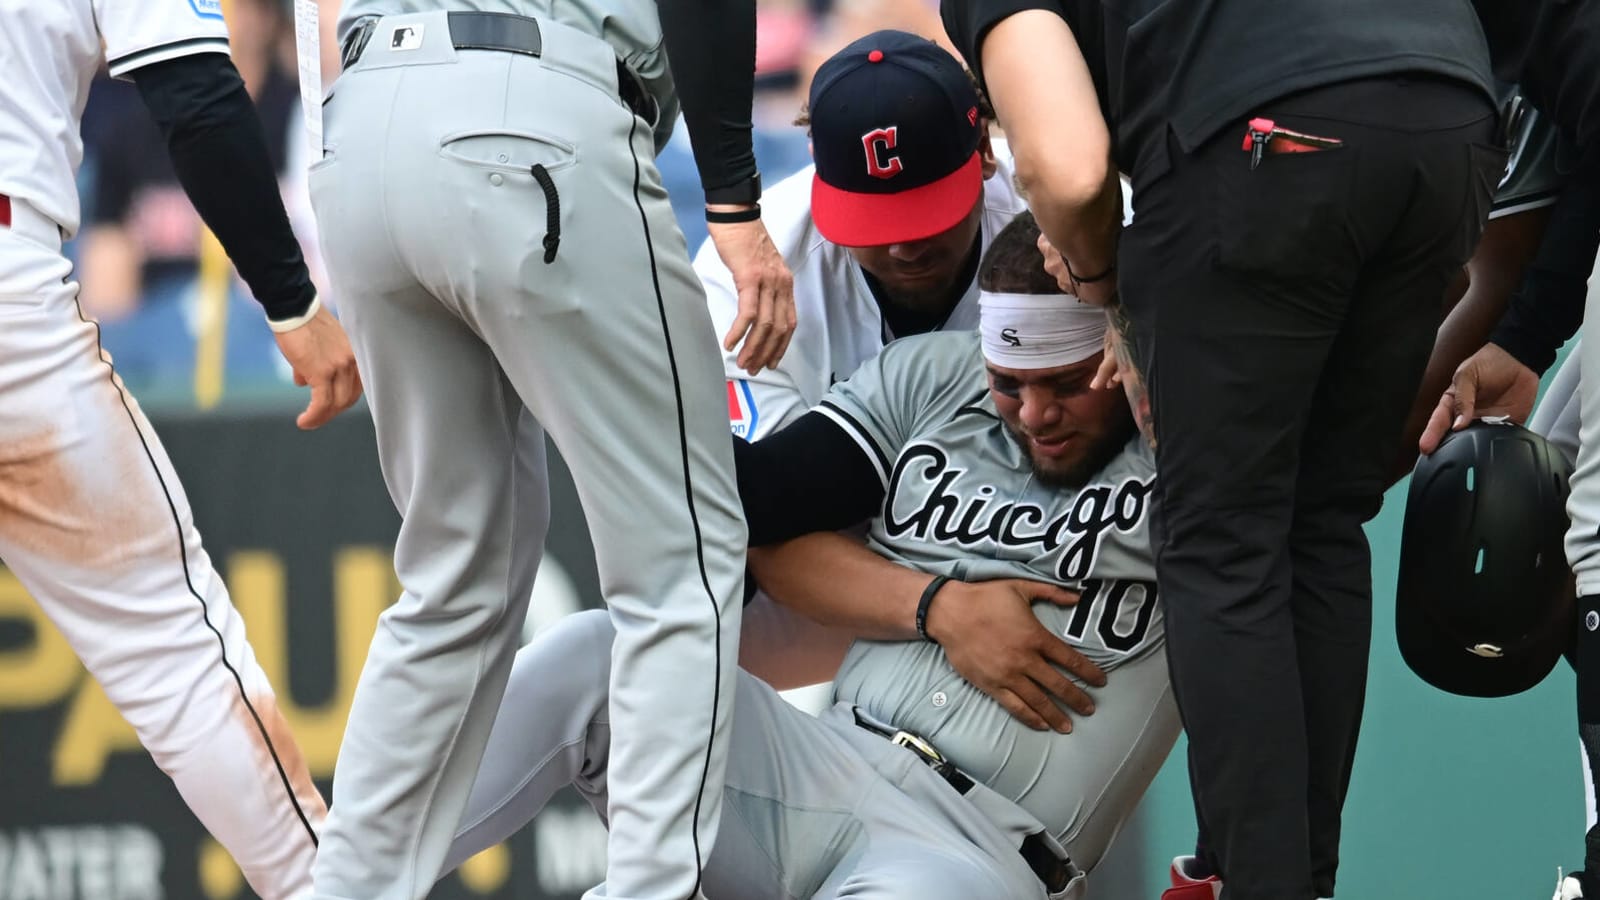 Another White Sox player injures himself on base paths